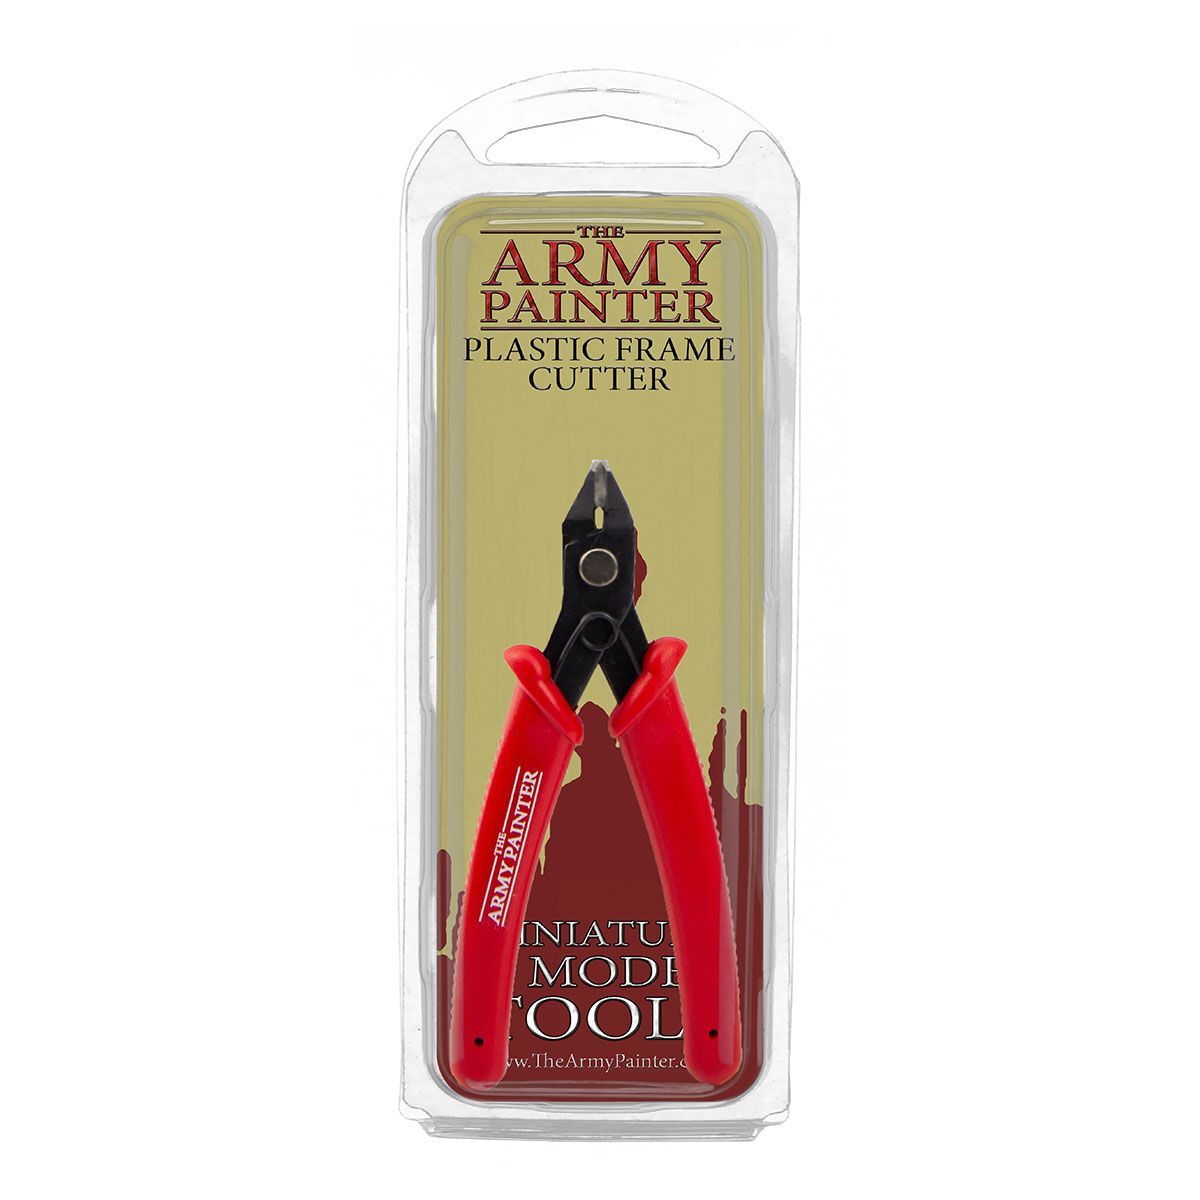 The Army Painter Miniature & Model Plastic Frame Cutter